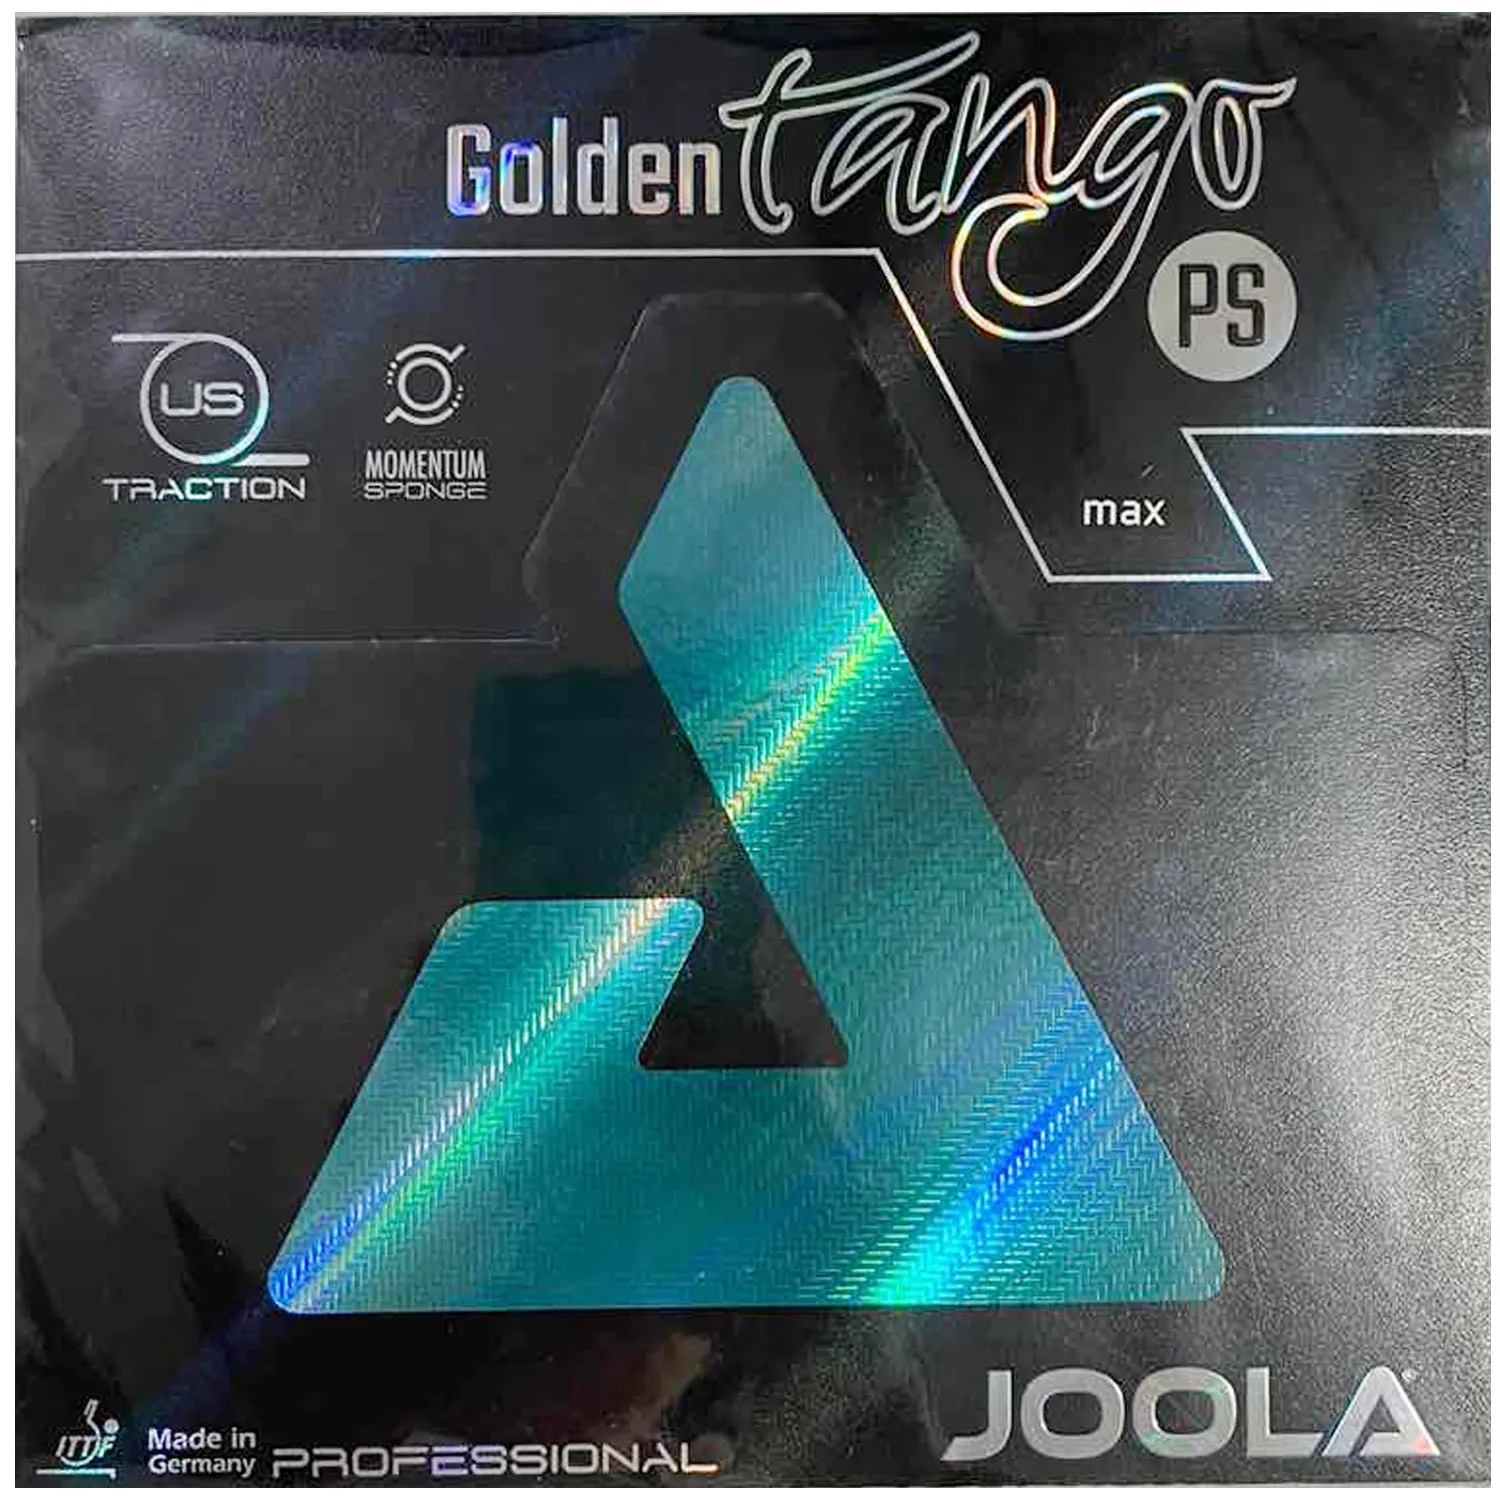 

Joola Golden Tango PS POWER SPONGE (Sticky Forehand Offensive) Table Tennis Rubber Pips-in Ping Pong Sponge